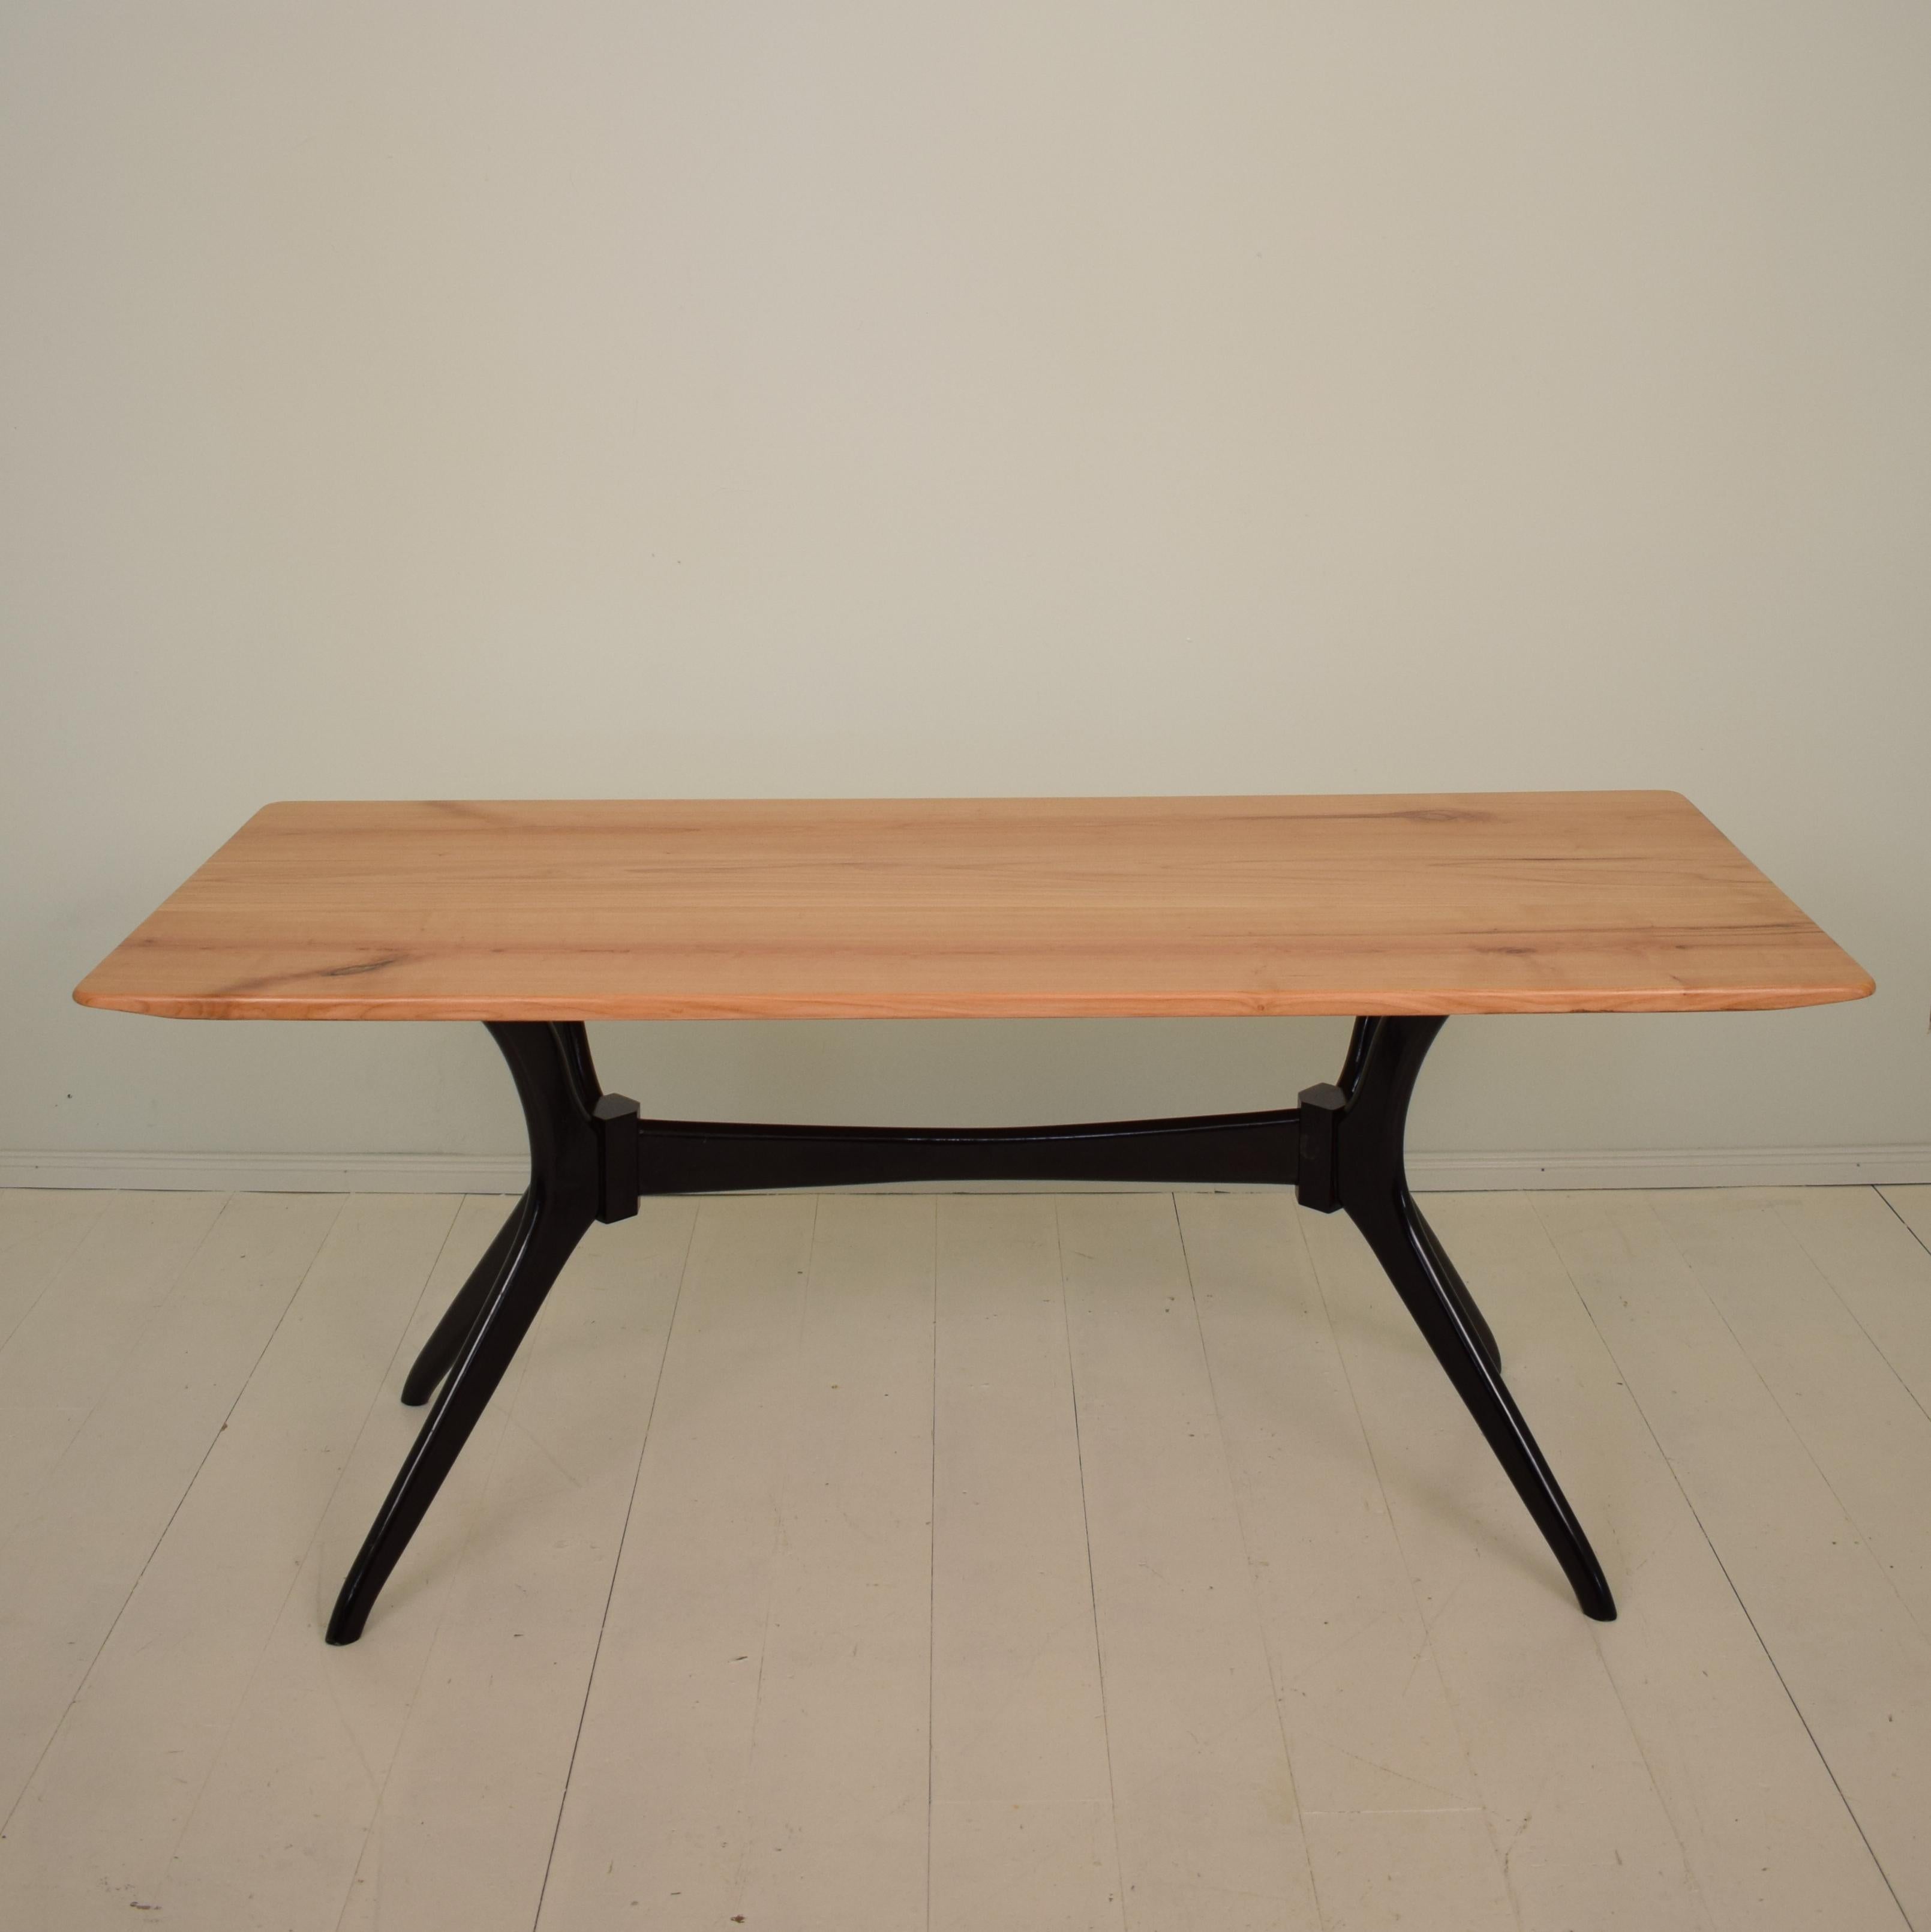 This elegant midcentury Italian dining table is made in the style of Ico Parisi.
The sculptural base is ebonized beech and the tabletop is made out of solid cherrywood. (the top is replaced).
A unique piece which is a great eyecatcher for your